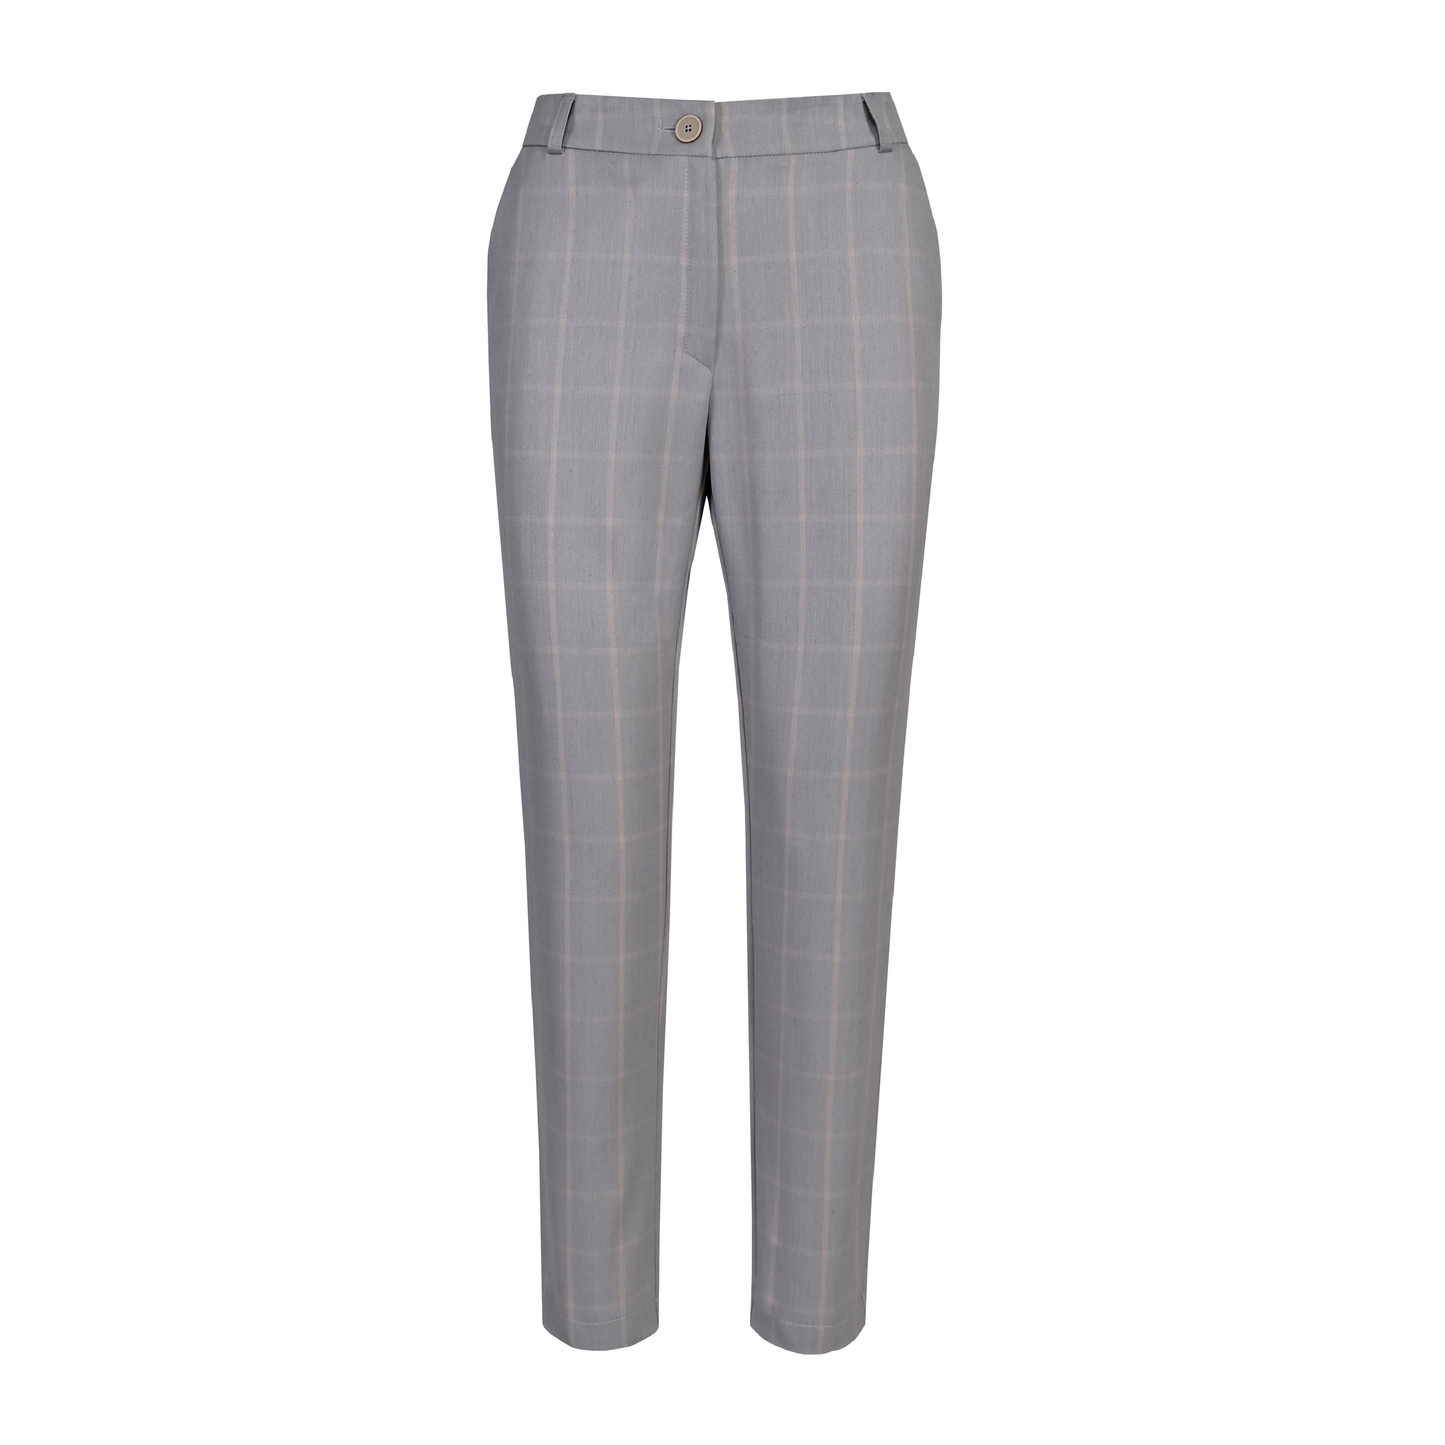 Alter Gray trousers